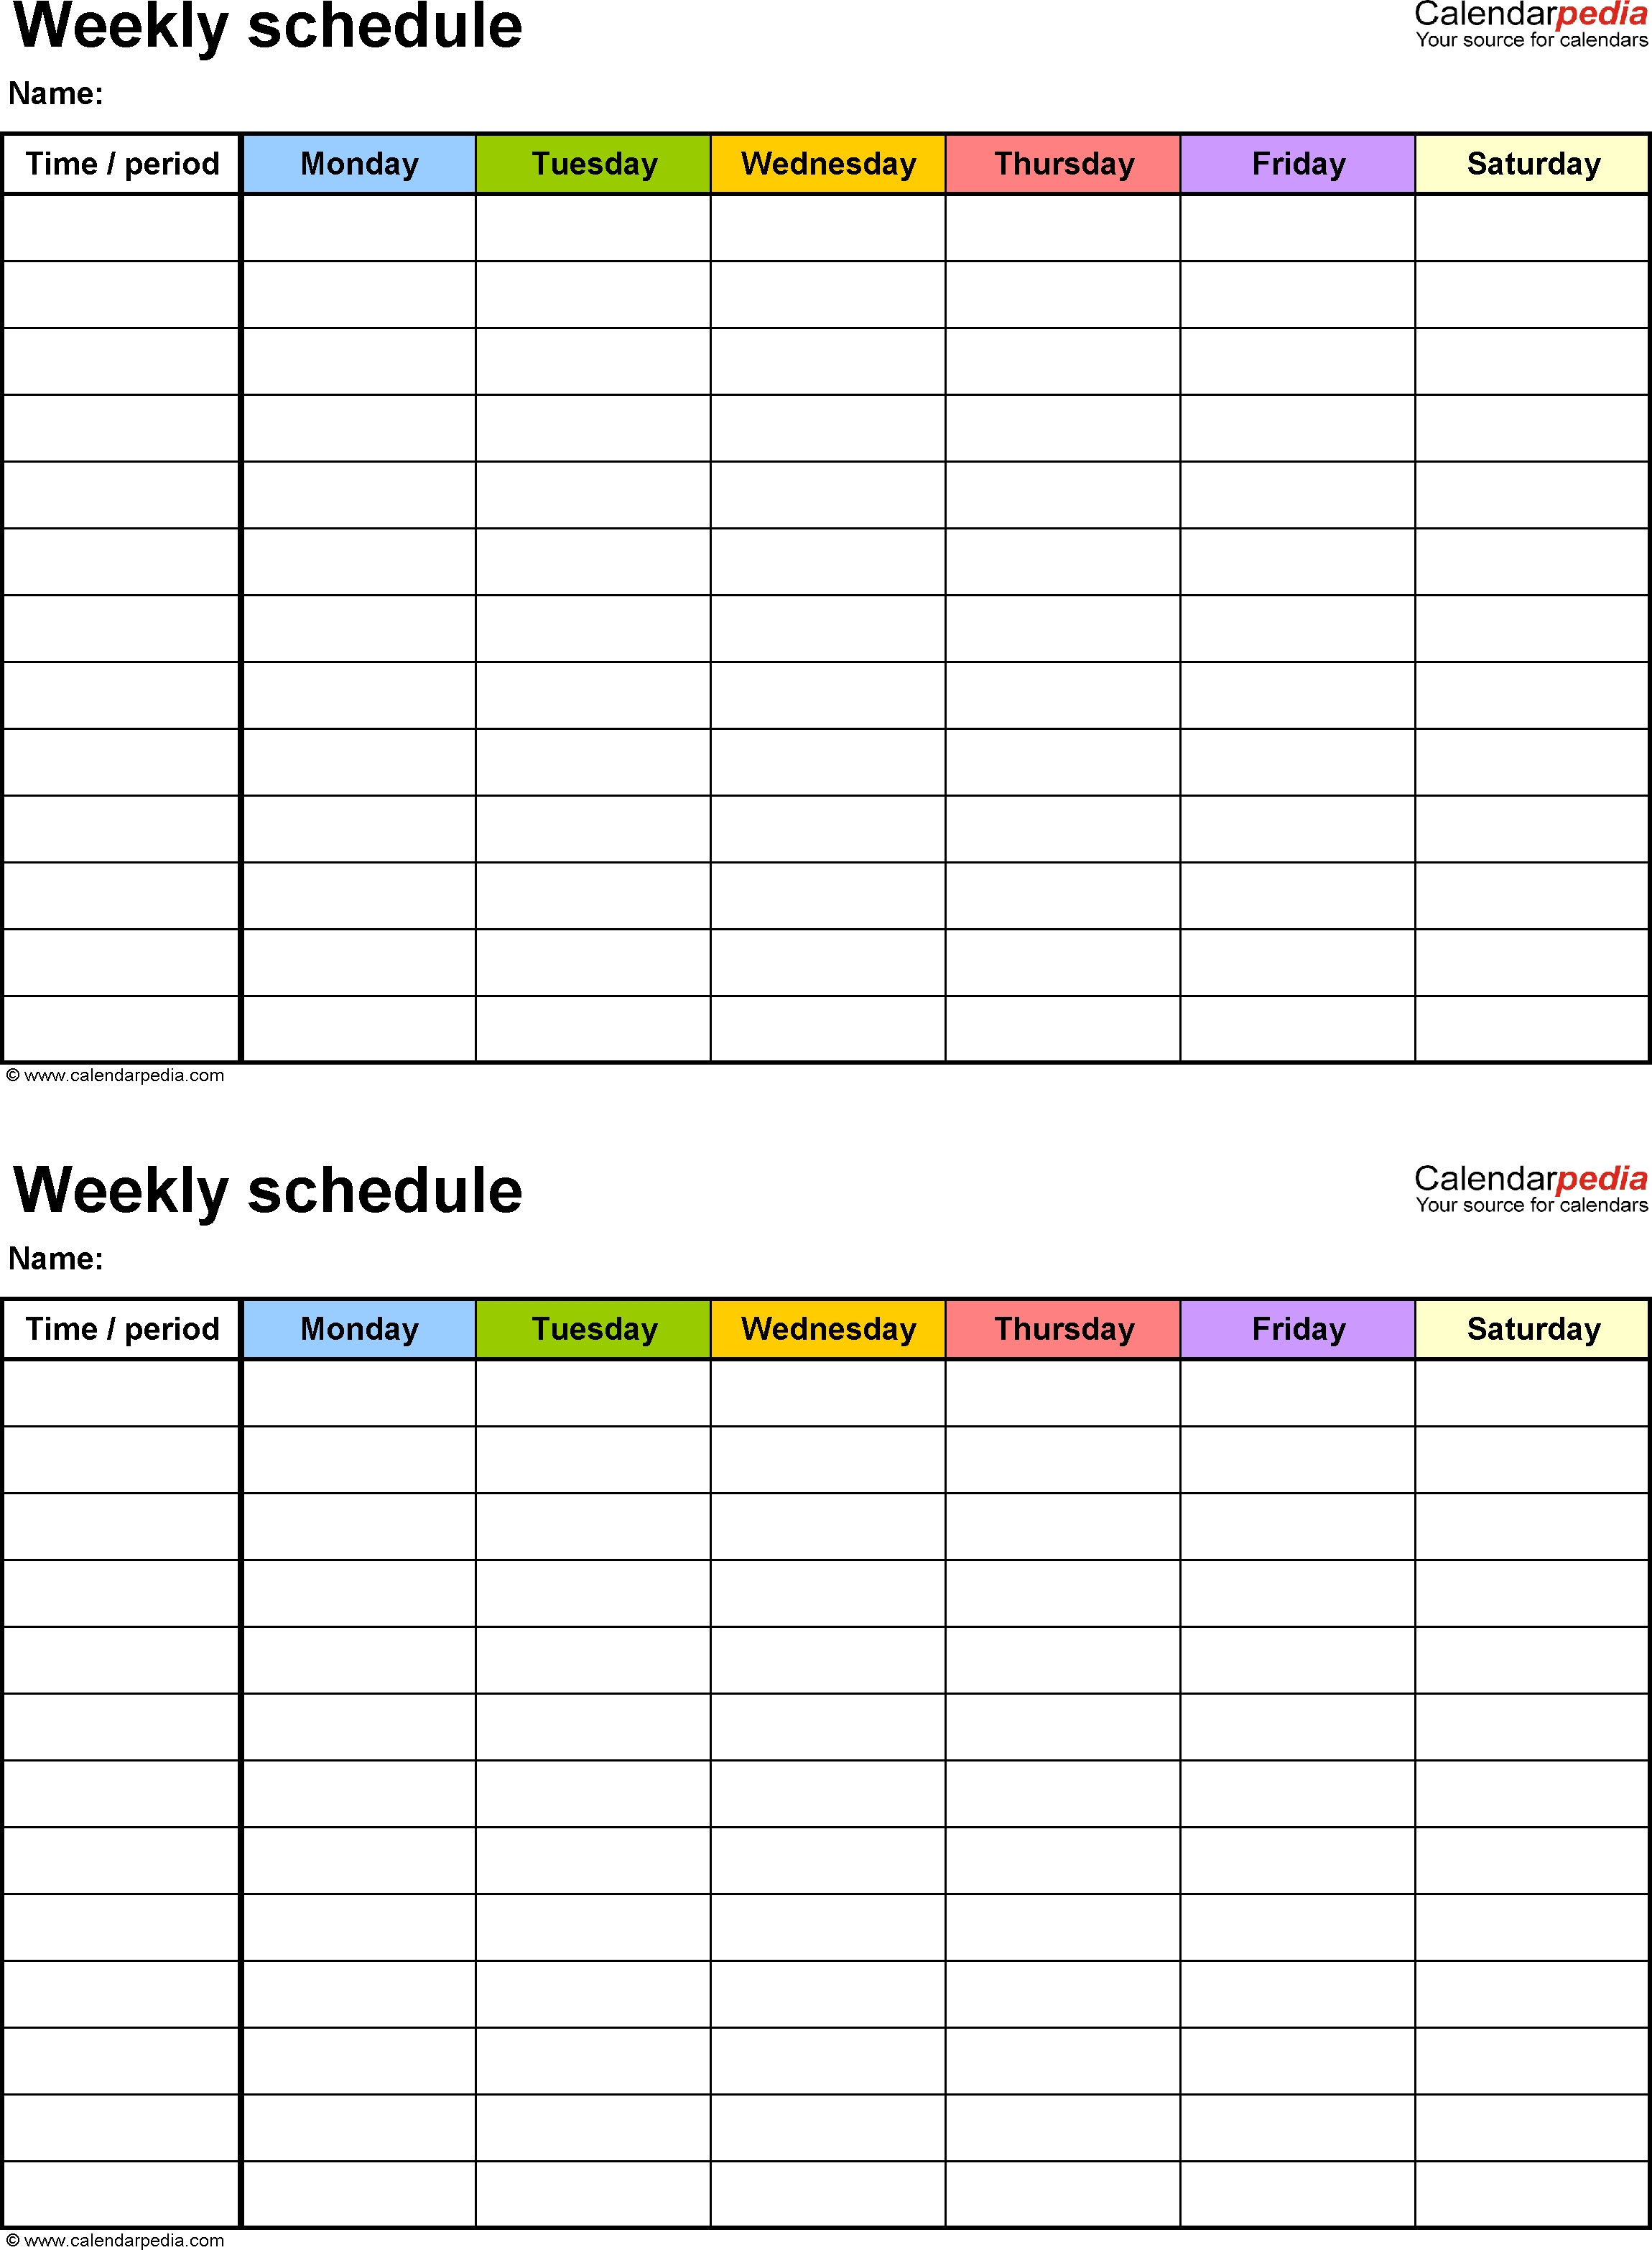 Free Weekly Schedule Templates For Word - 18 Templates throughout Weekly Calendar Template 7 Day